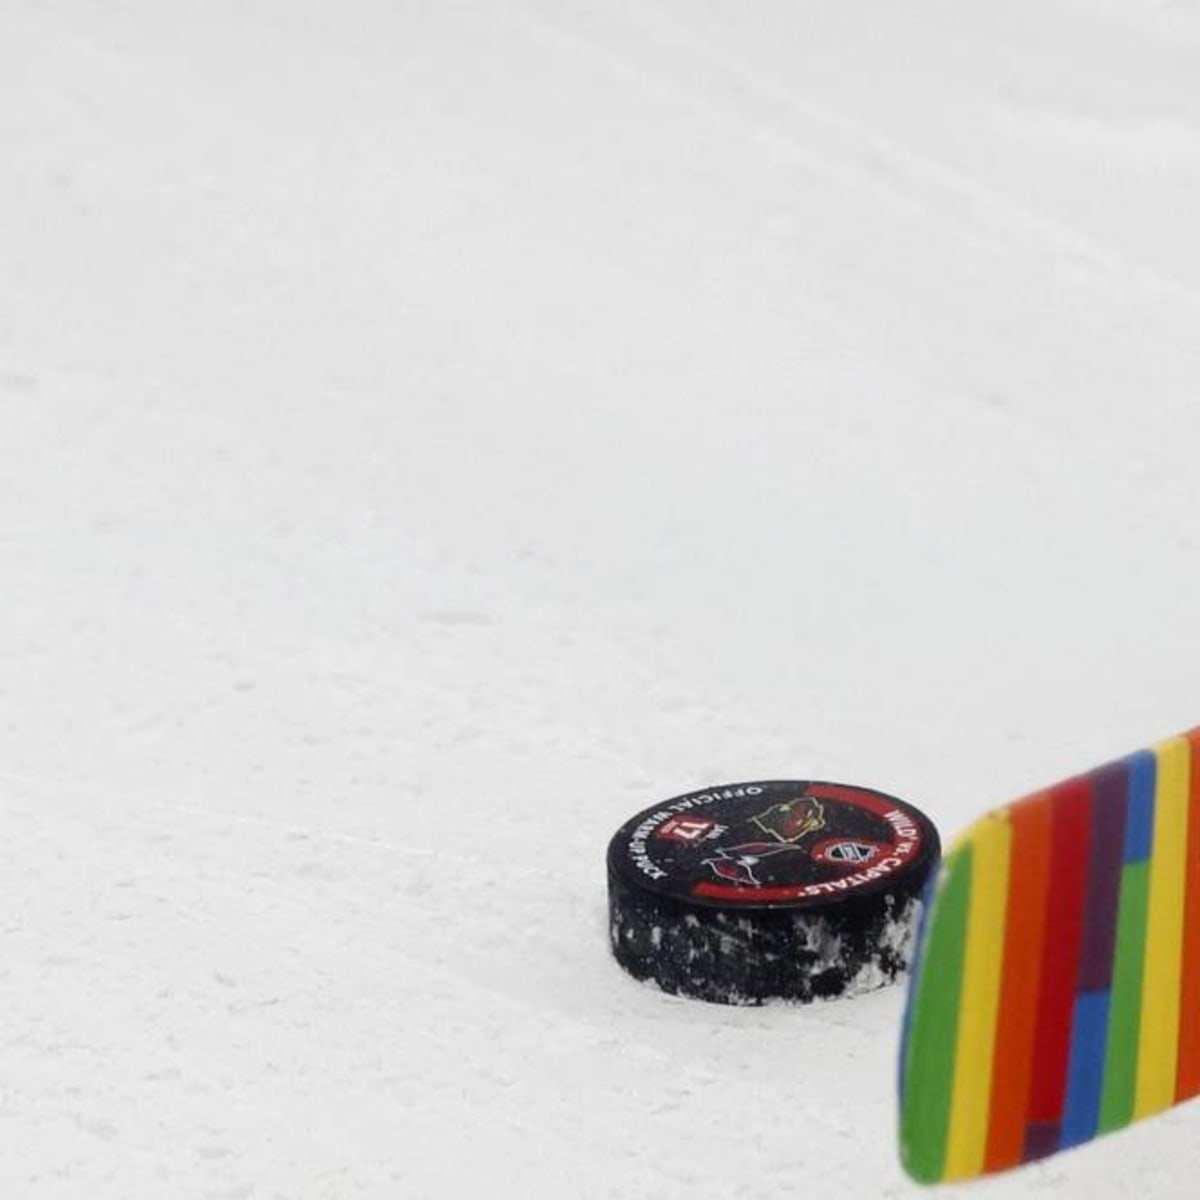 NHL players gearing up to use Pride Tape despite league ban? - Outsports